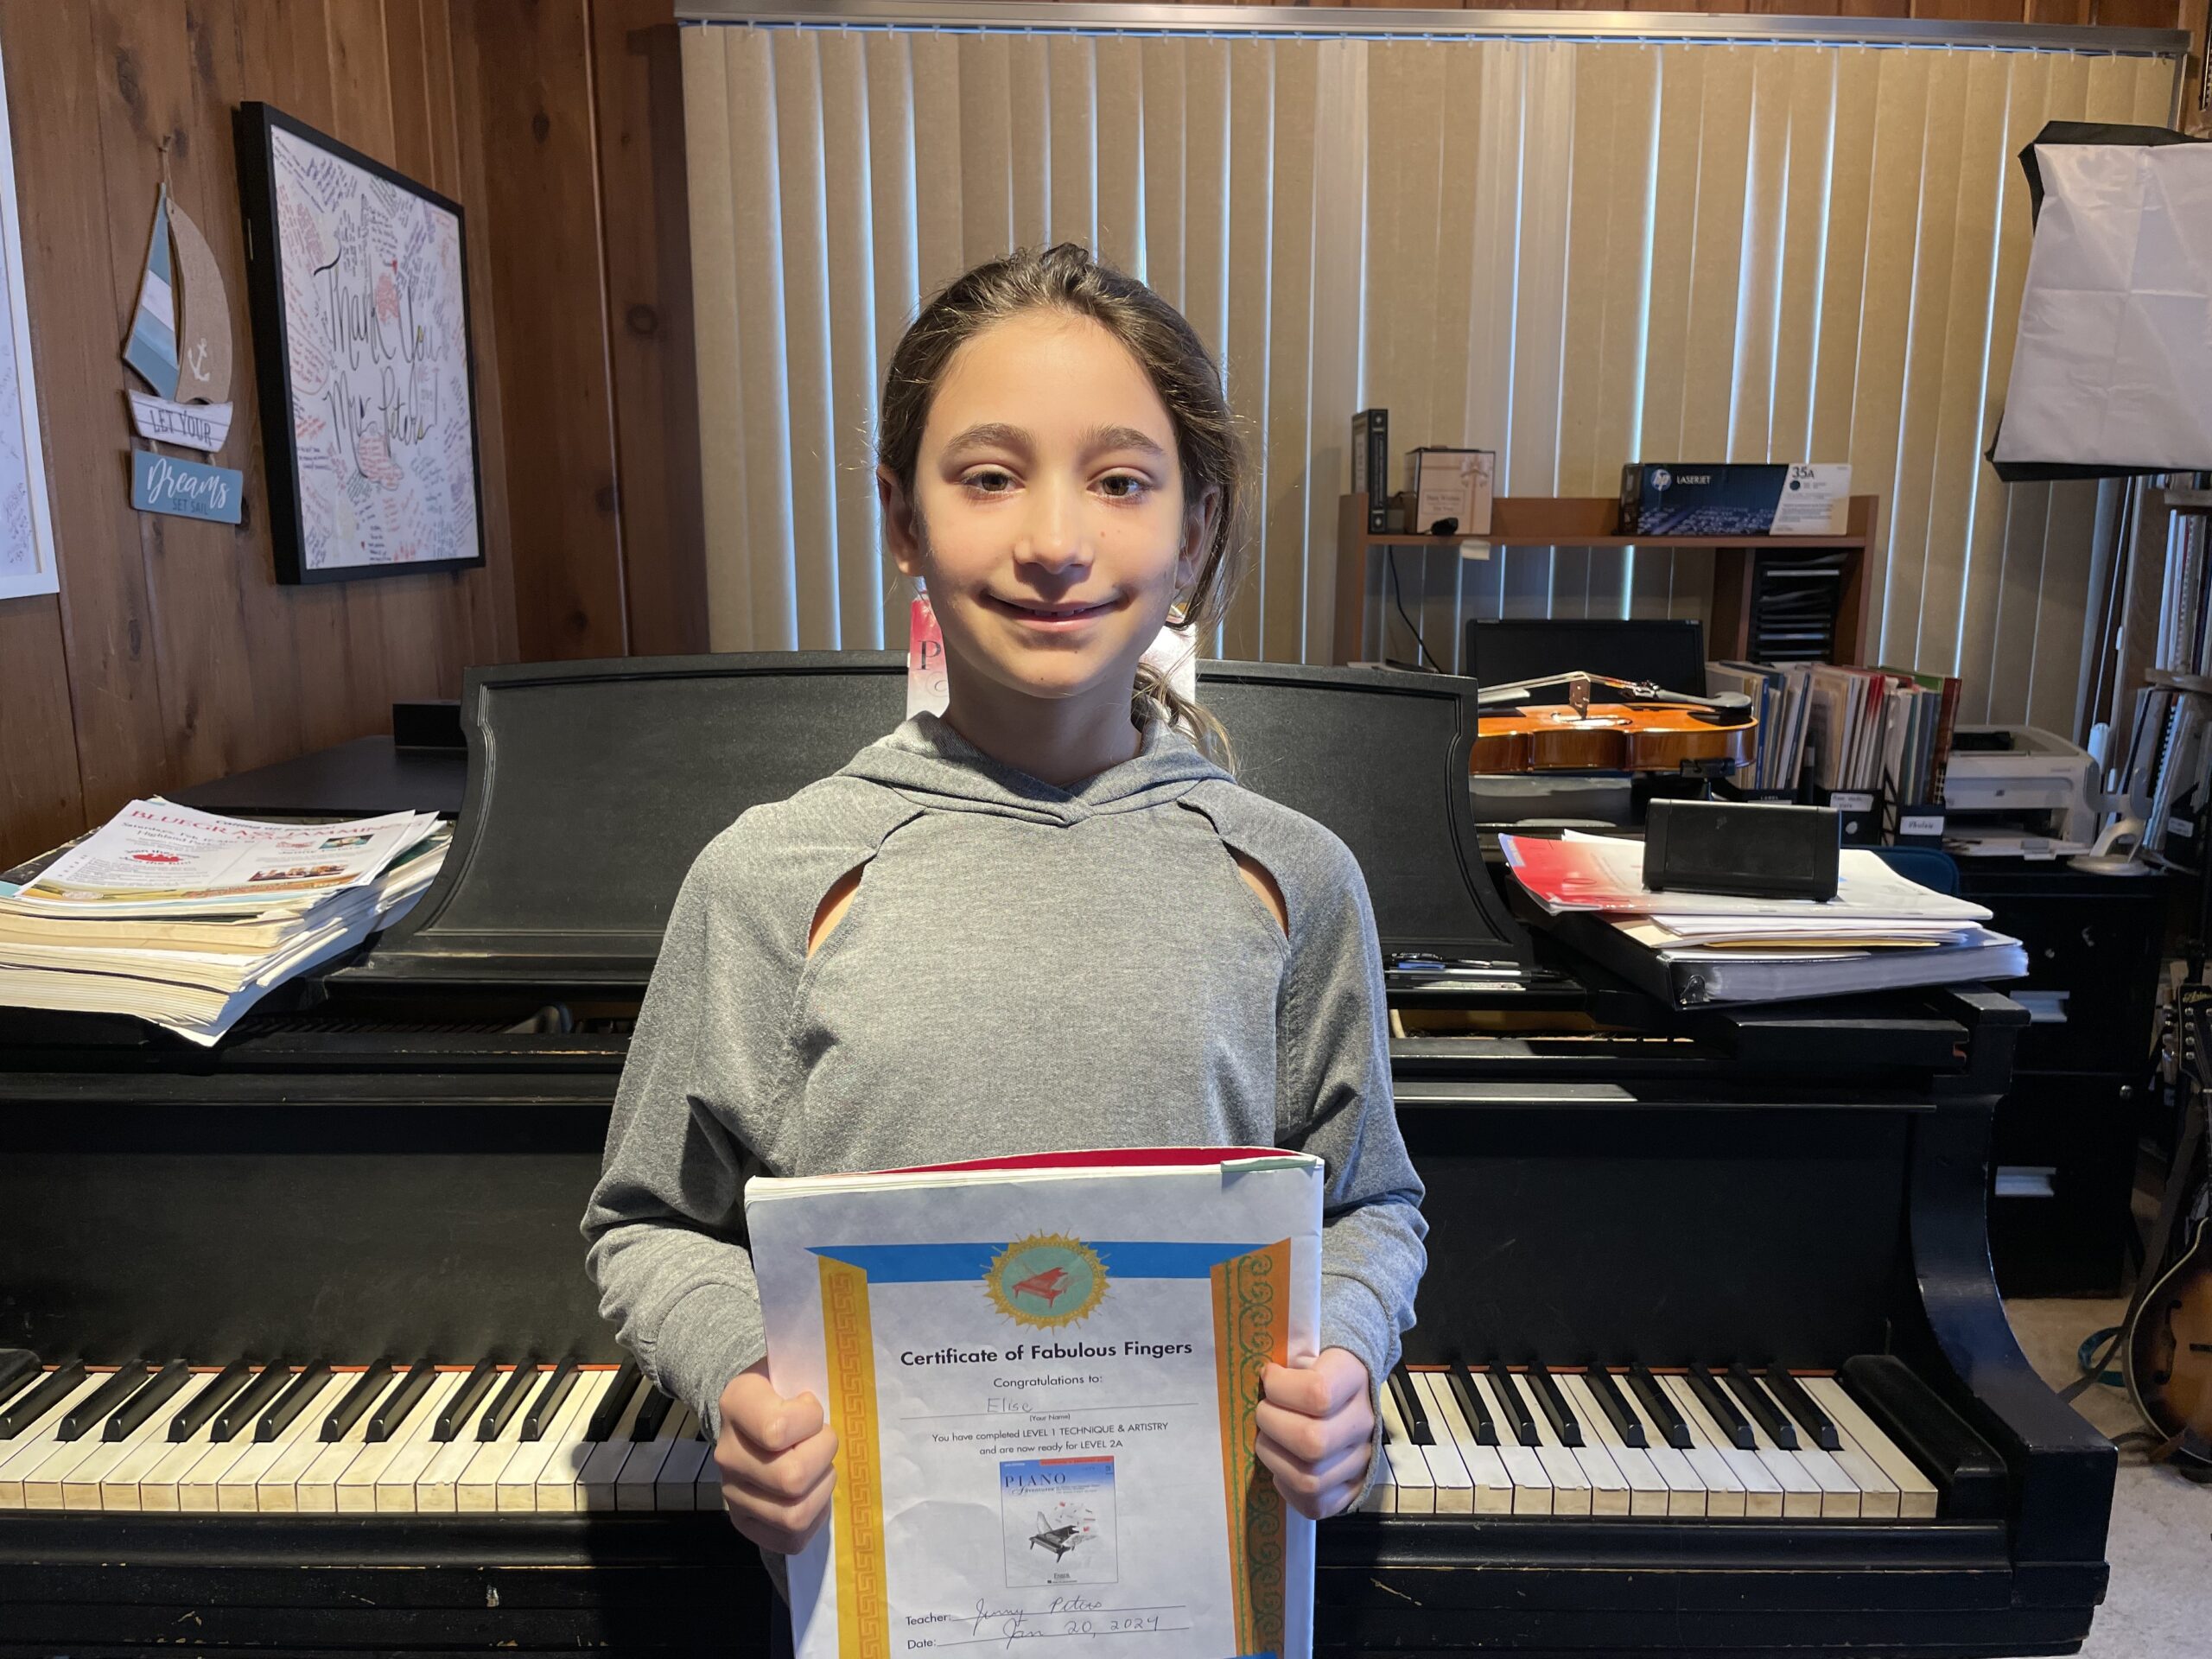 Girl holding certificate in front of piano